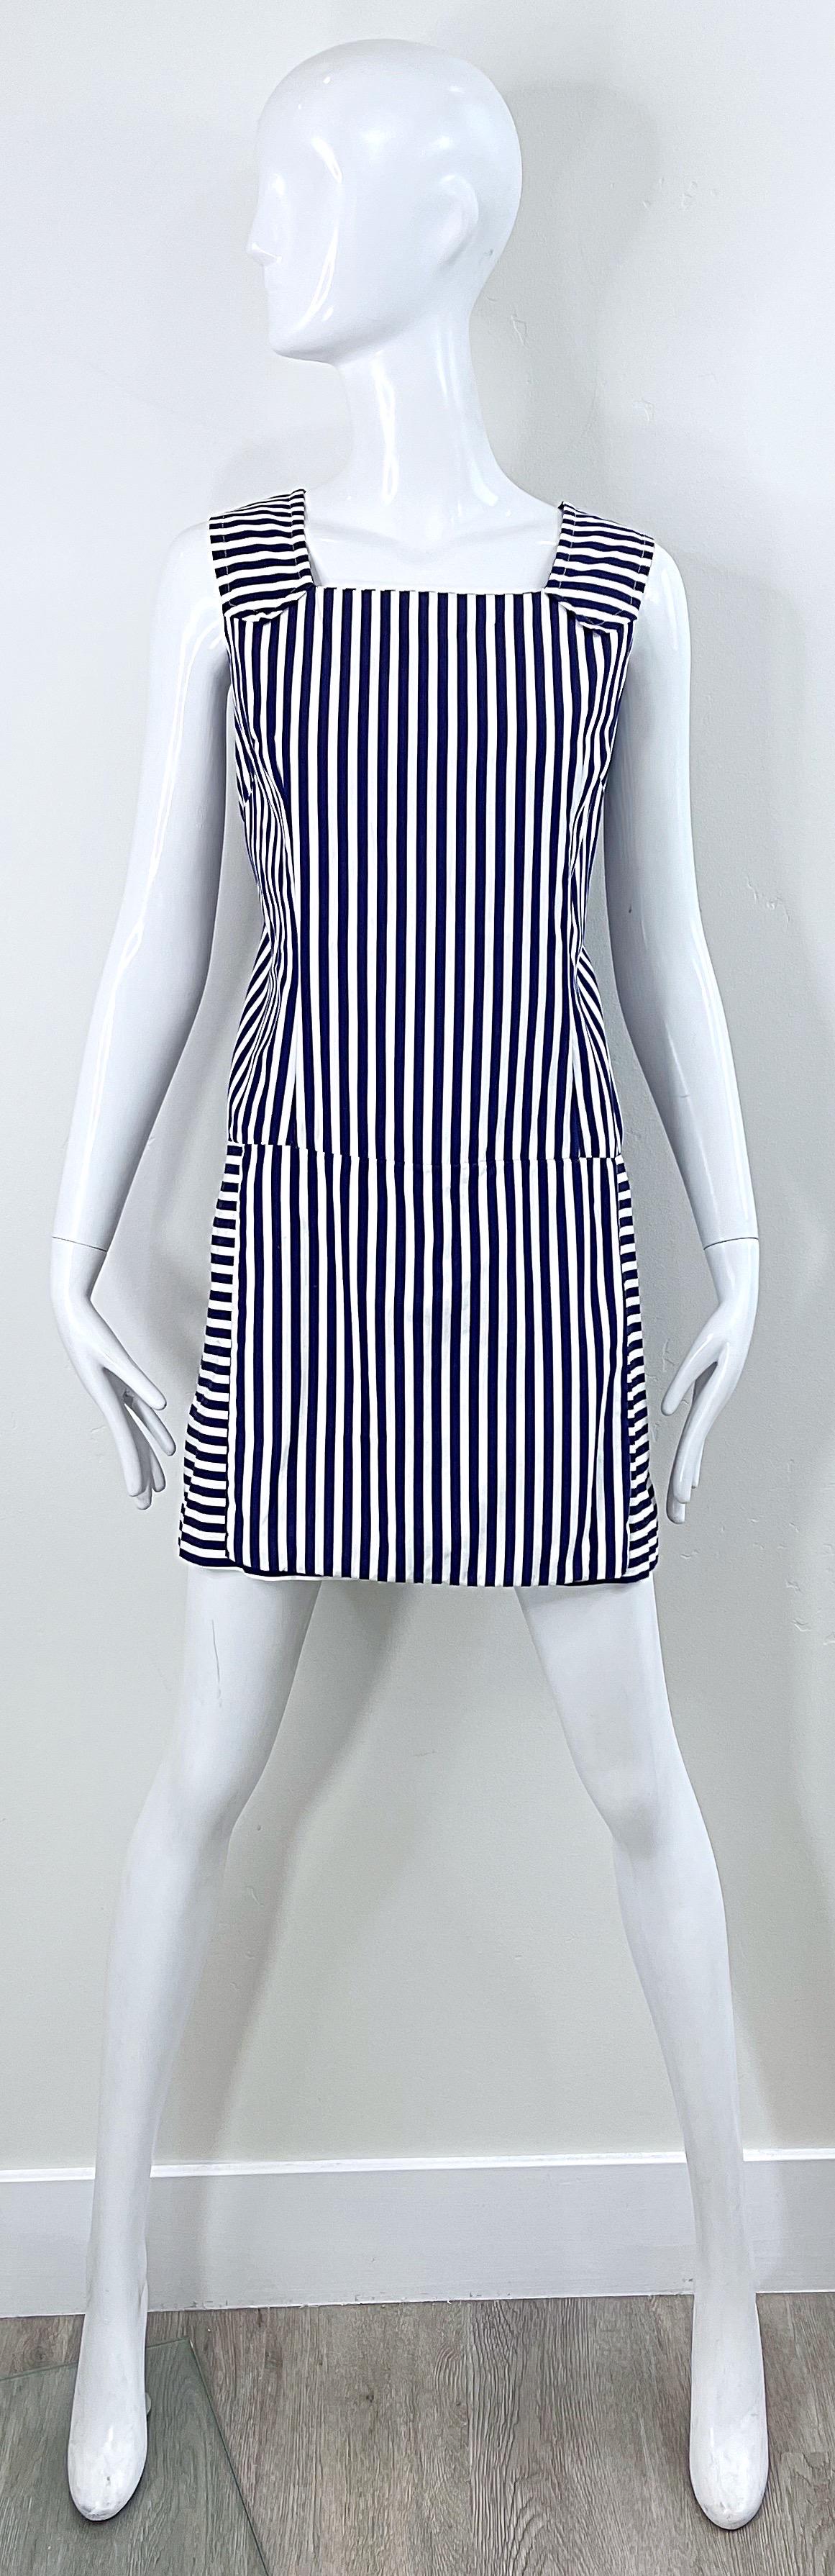 Stylish 1960s large size navy blue and white striped romper, with skirt over ! Features flattering vertical stripes down the front and back. Contrasting horizontal stripes on sleeves. Full metal zipper up the back with hook-and-eye closure. 
In